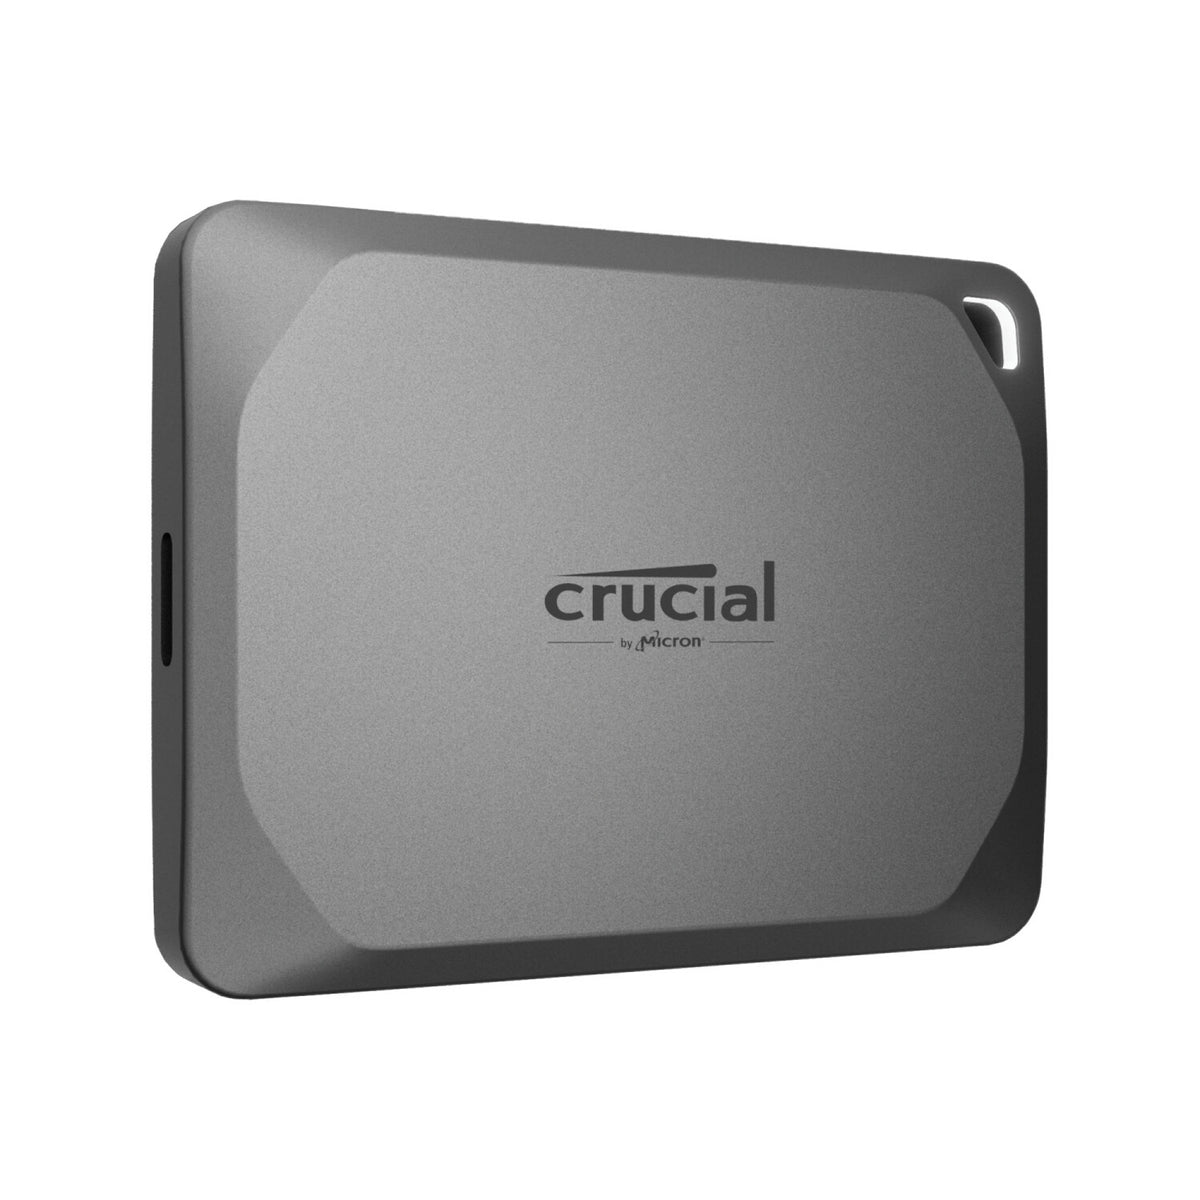 Crucial X9 Pro External solid state drive - 4 TB